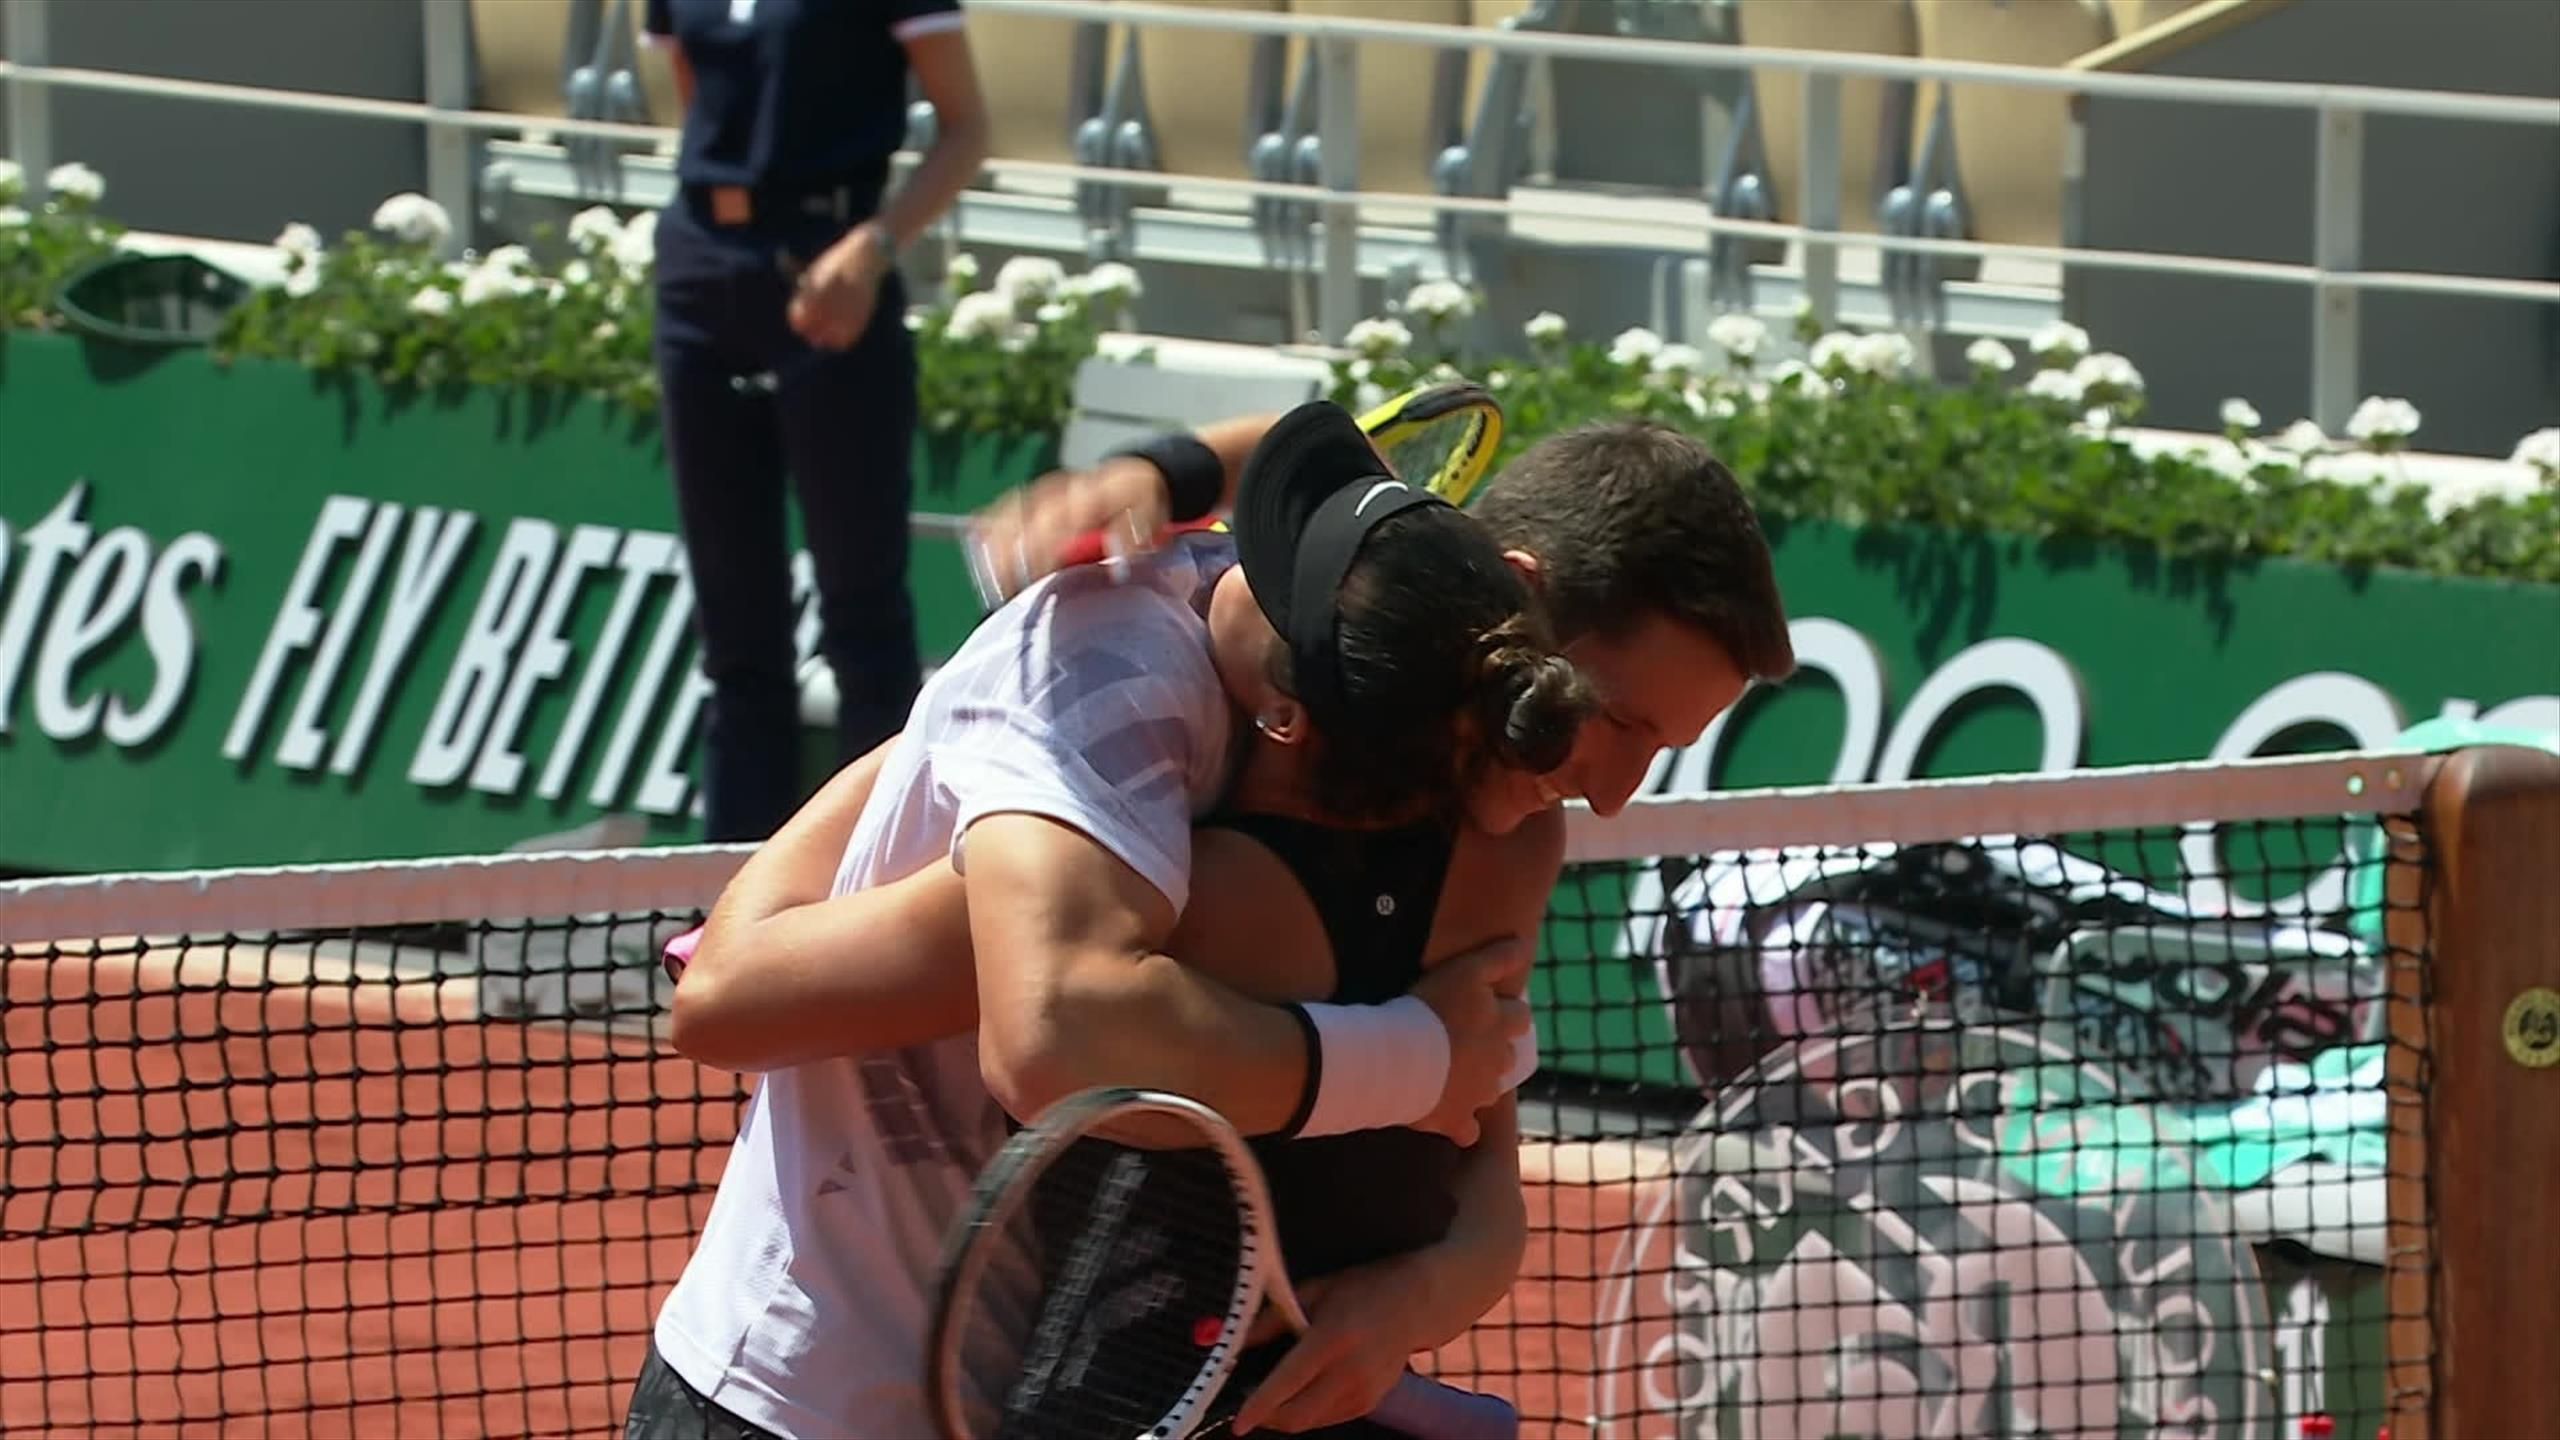 French Open tennis - Watch the moment Joe Salisbury and Desirae Krawczyk clinch mixed doubles title at Roland Garros - Tennis video